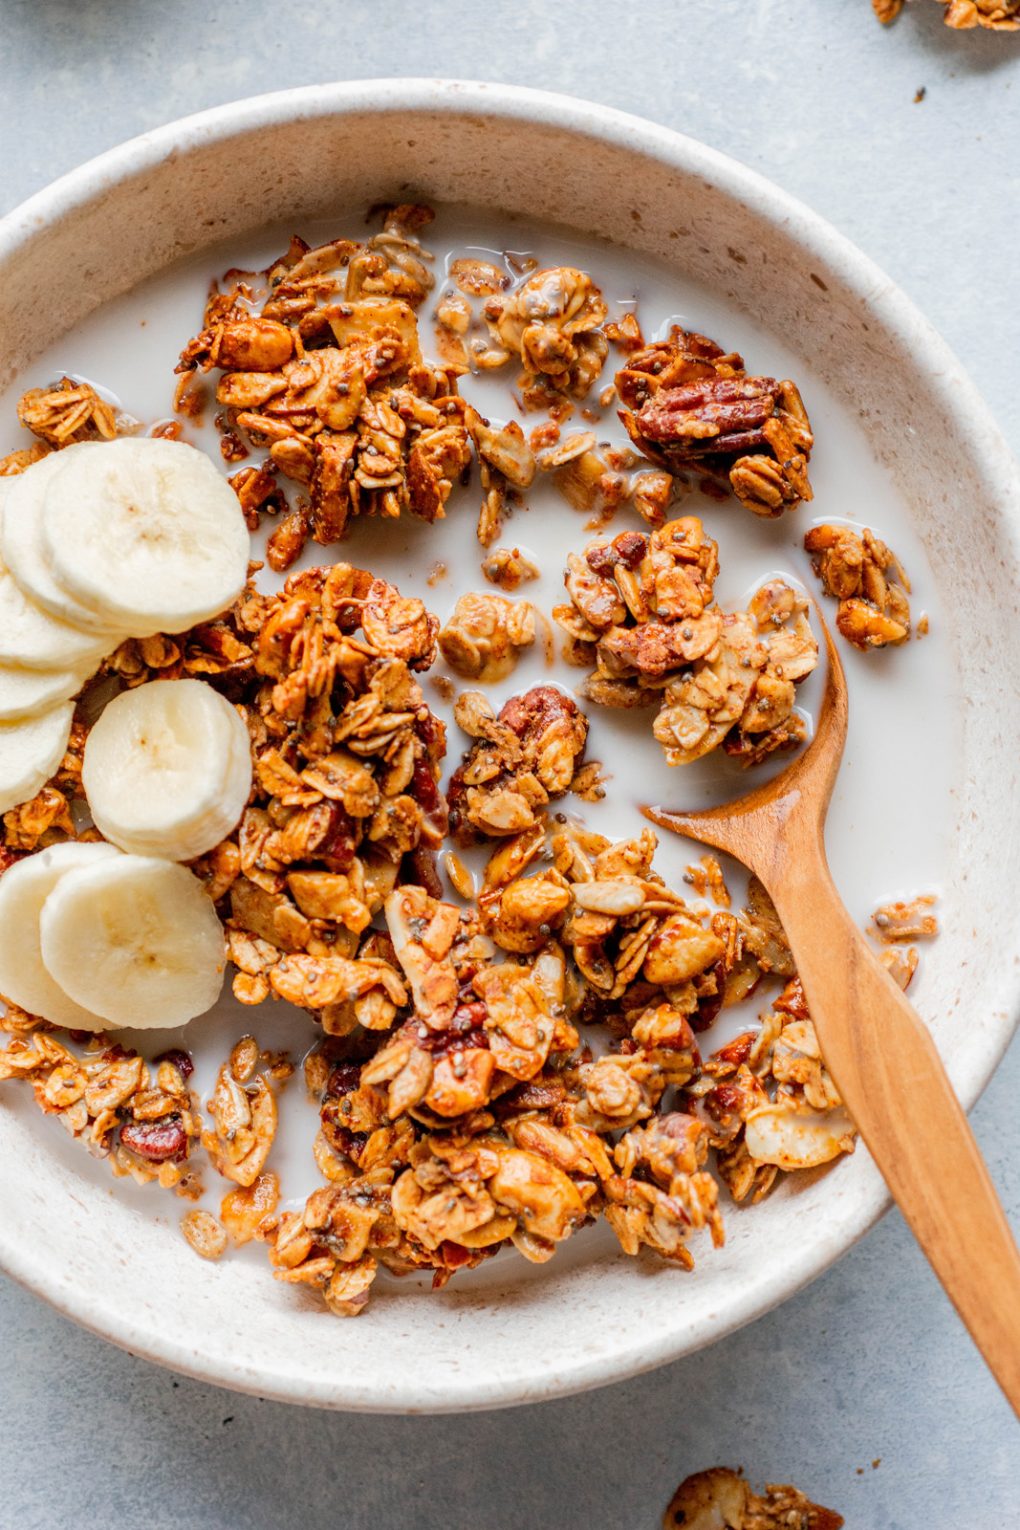 Overhead image of a white bowl on a light background, filled with chunky gluten free granola, almond milk, and sliced banana. With a wooden spoon inside the bowl. 